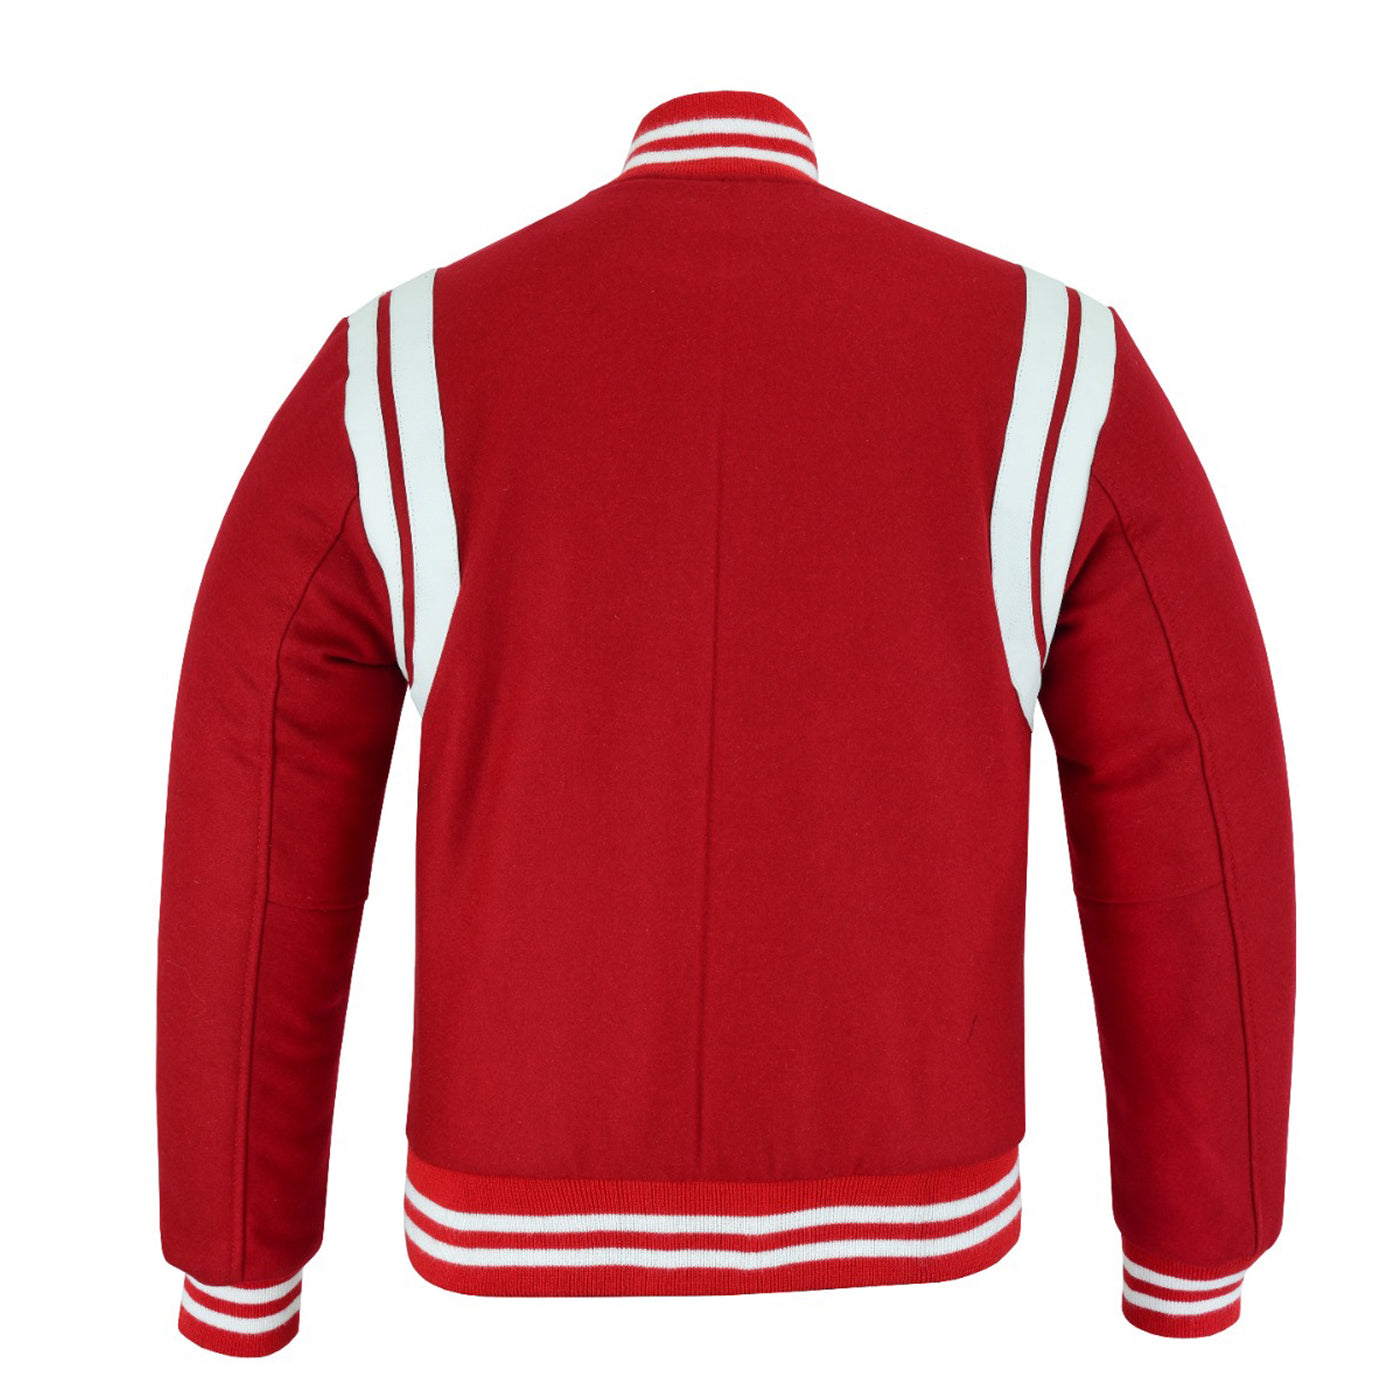 Classic Varisty Letterman Baseball College Jacket Red Wool with White Double Leather Strip